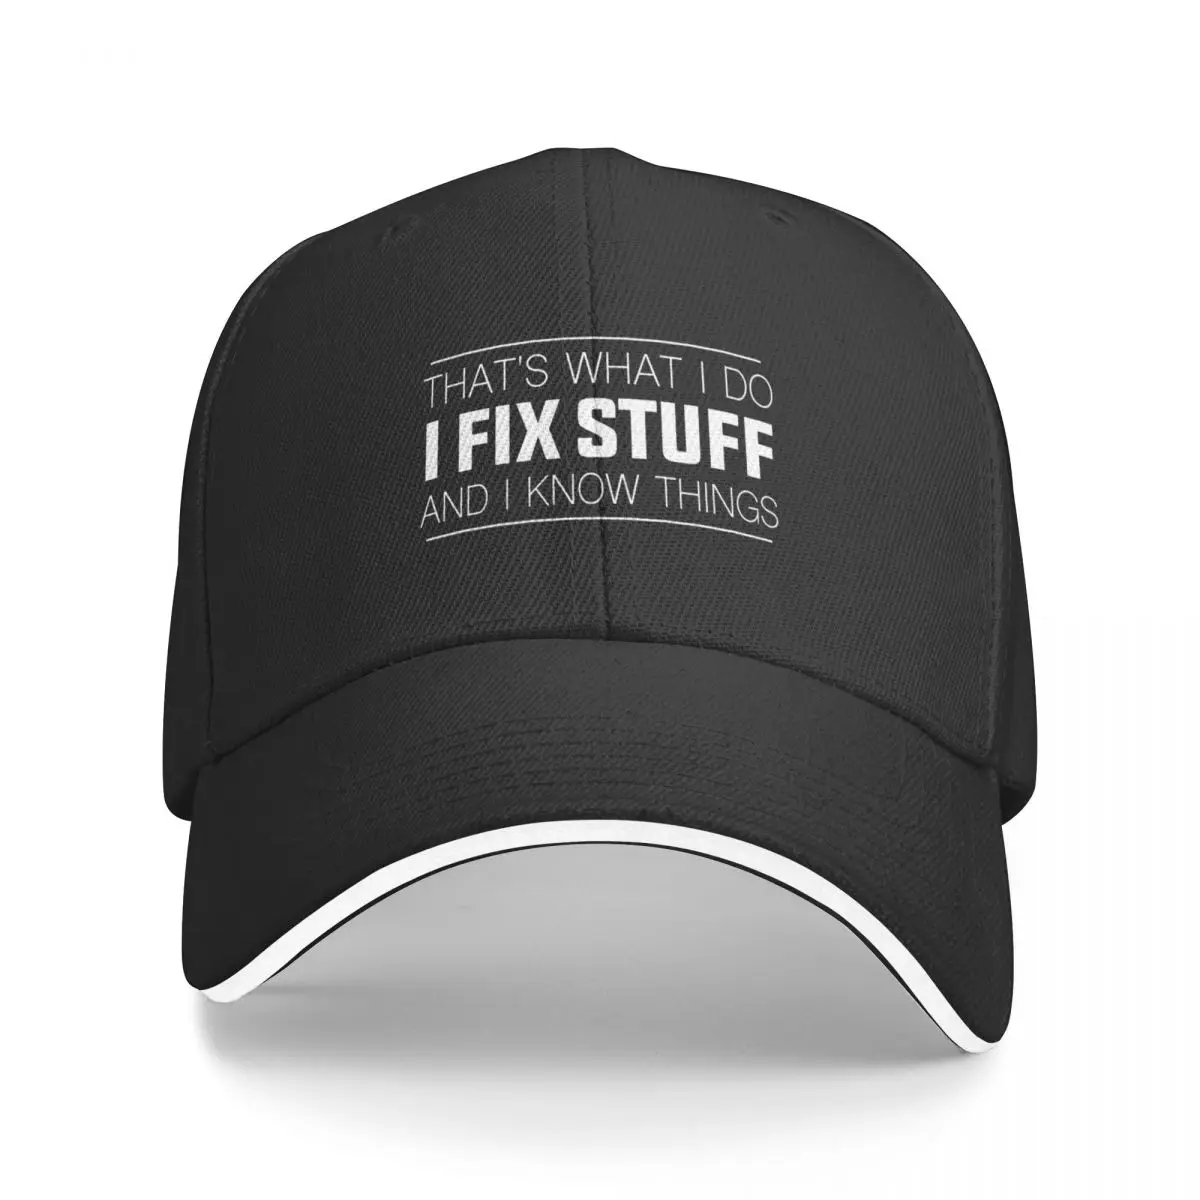 

That's What I Do I Fix Stuff And I Know Things Funny Saying Baseball Cap Horse Hat Streetwear Women's Men's